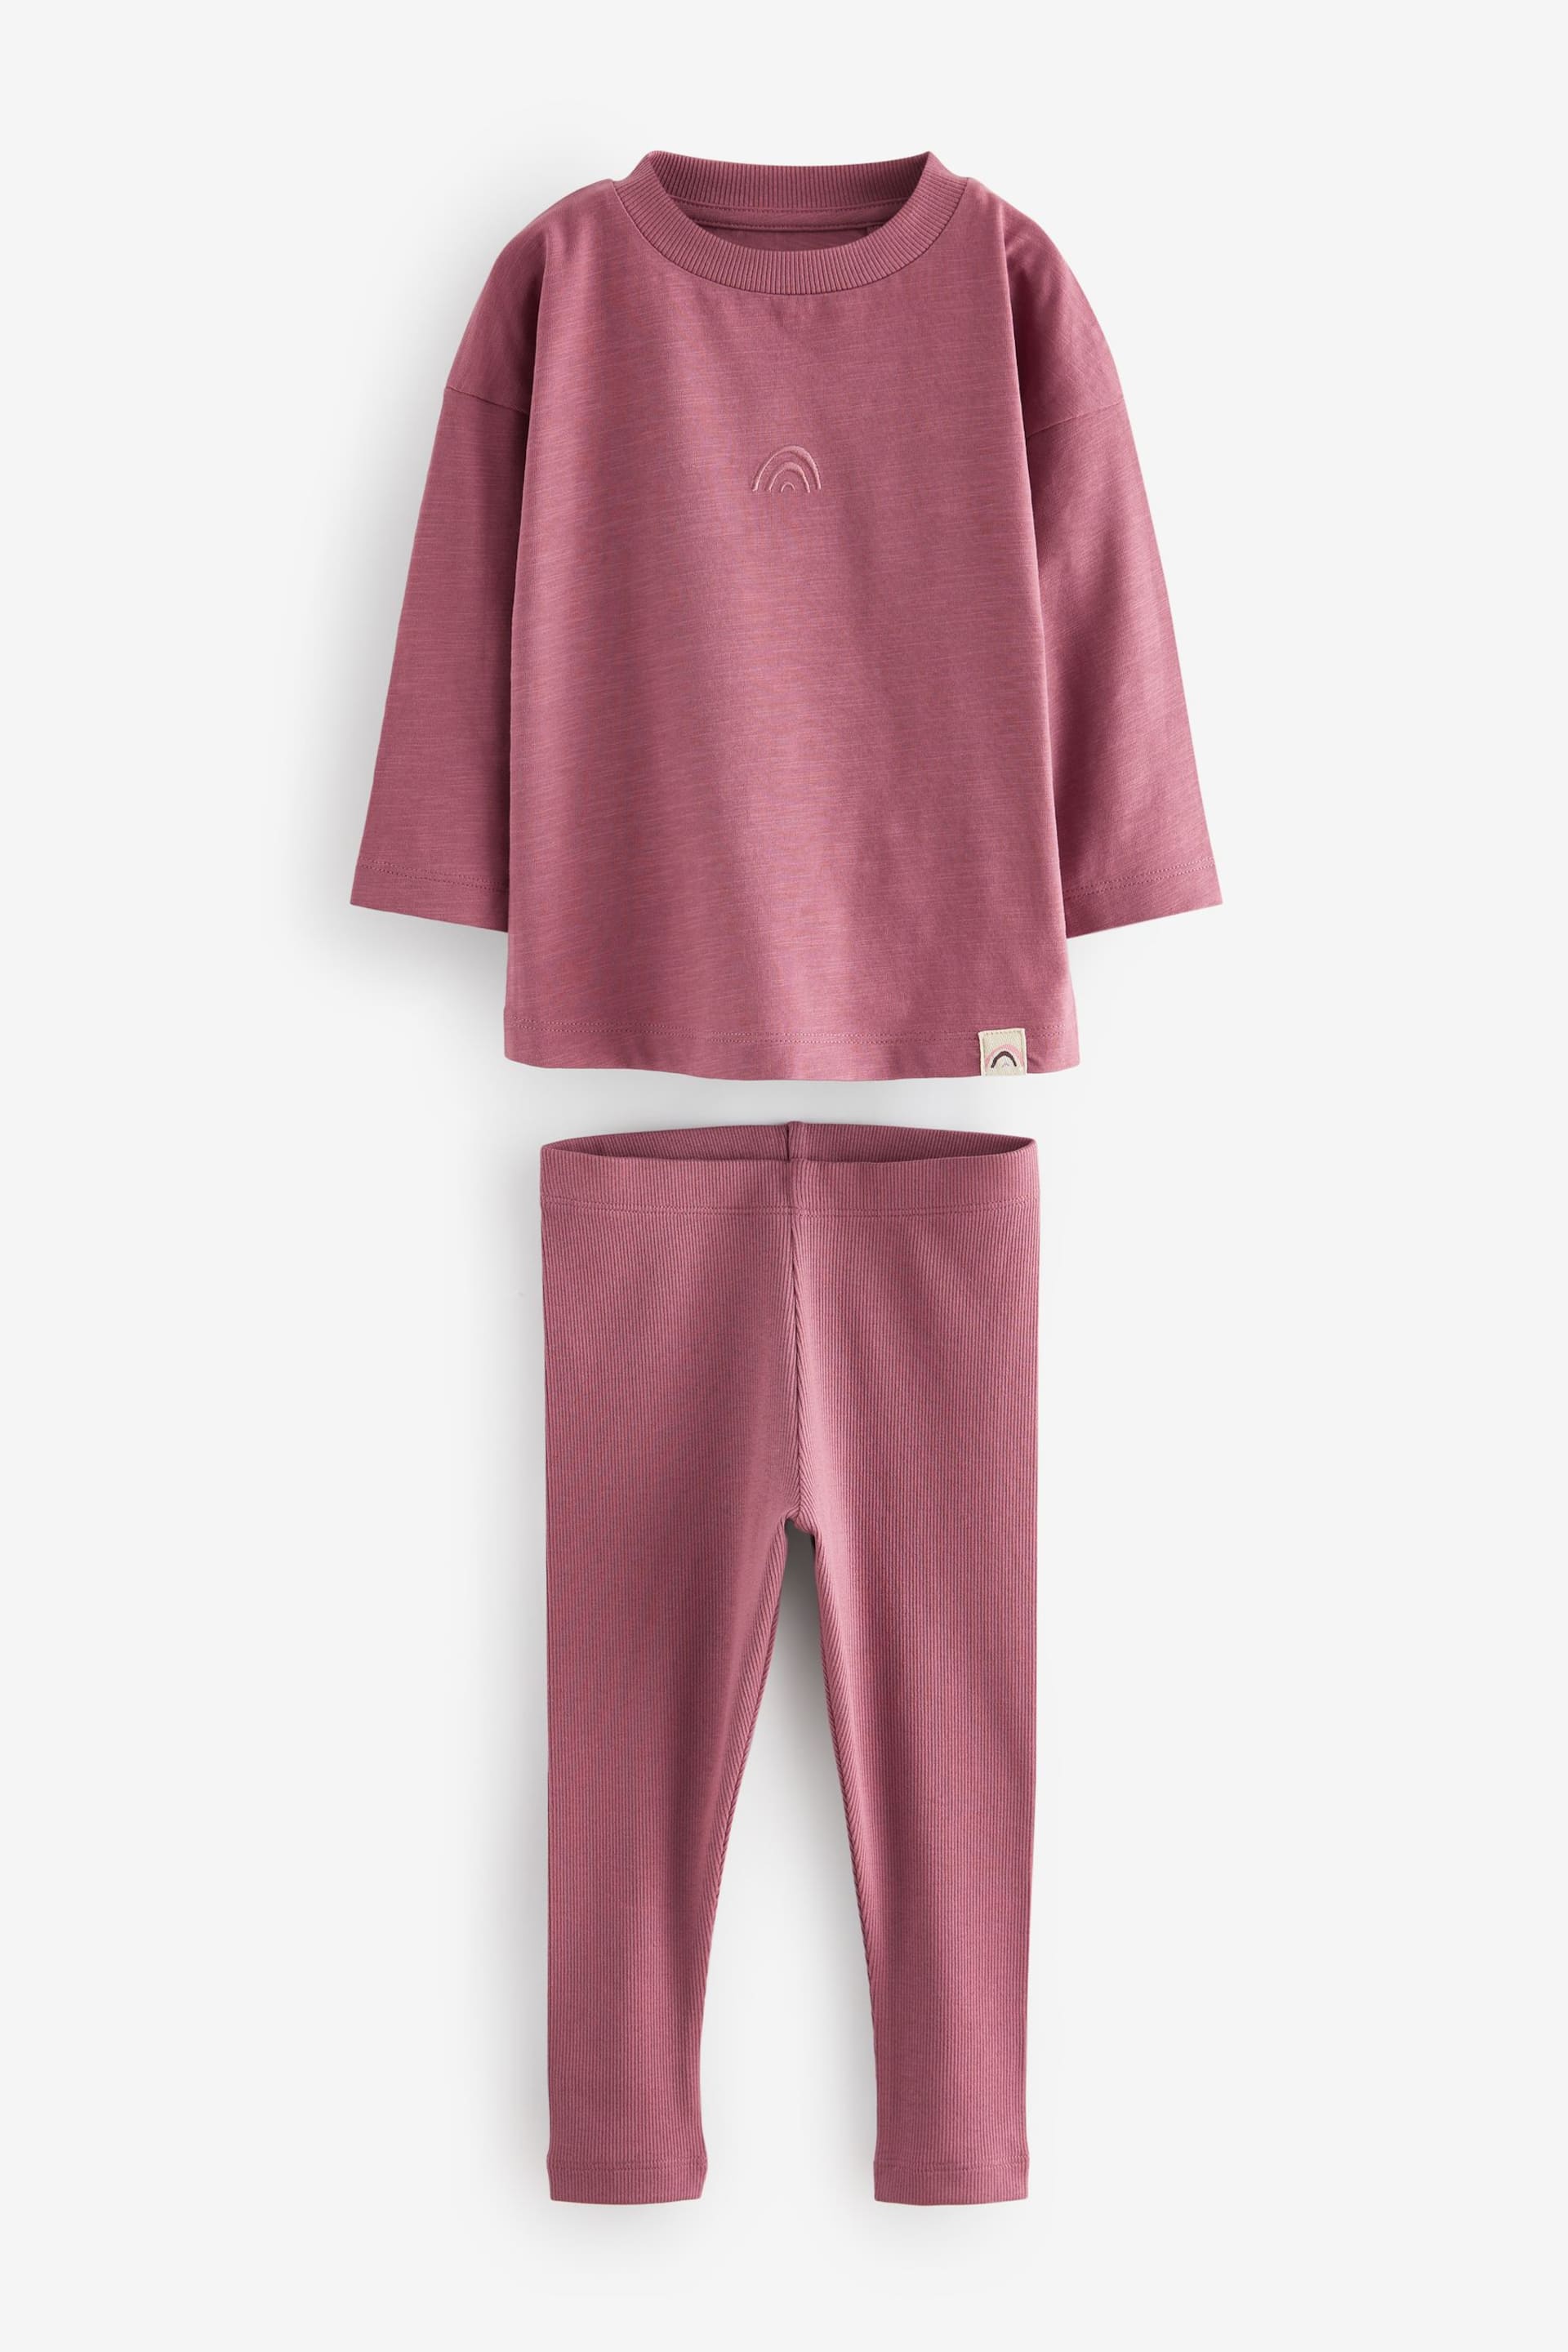 Berry/Pink Pyjamas 3 Pack (9mths-12yrs) - Image 2 of 10